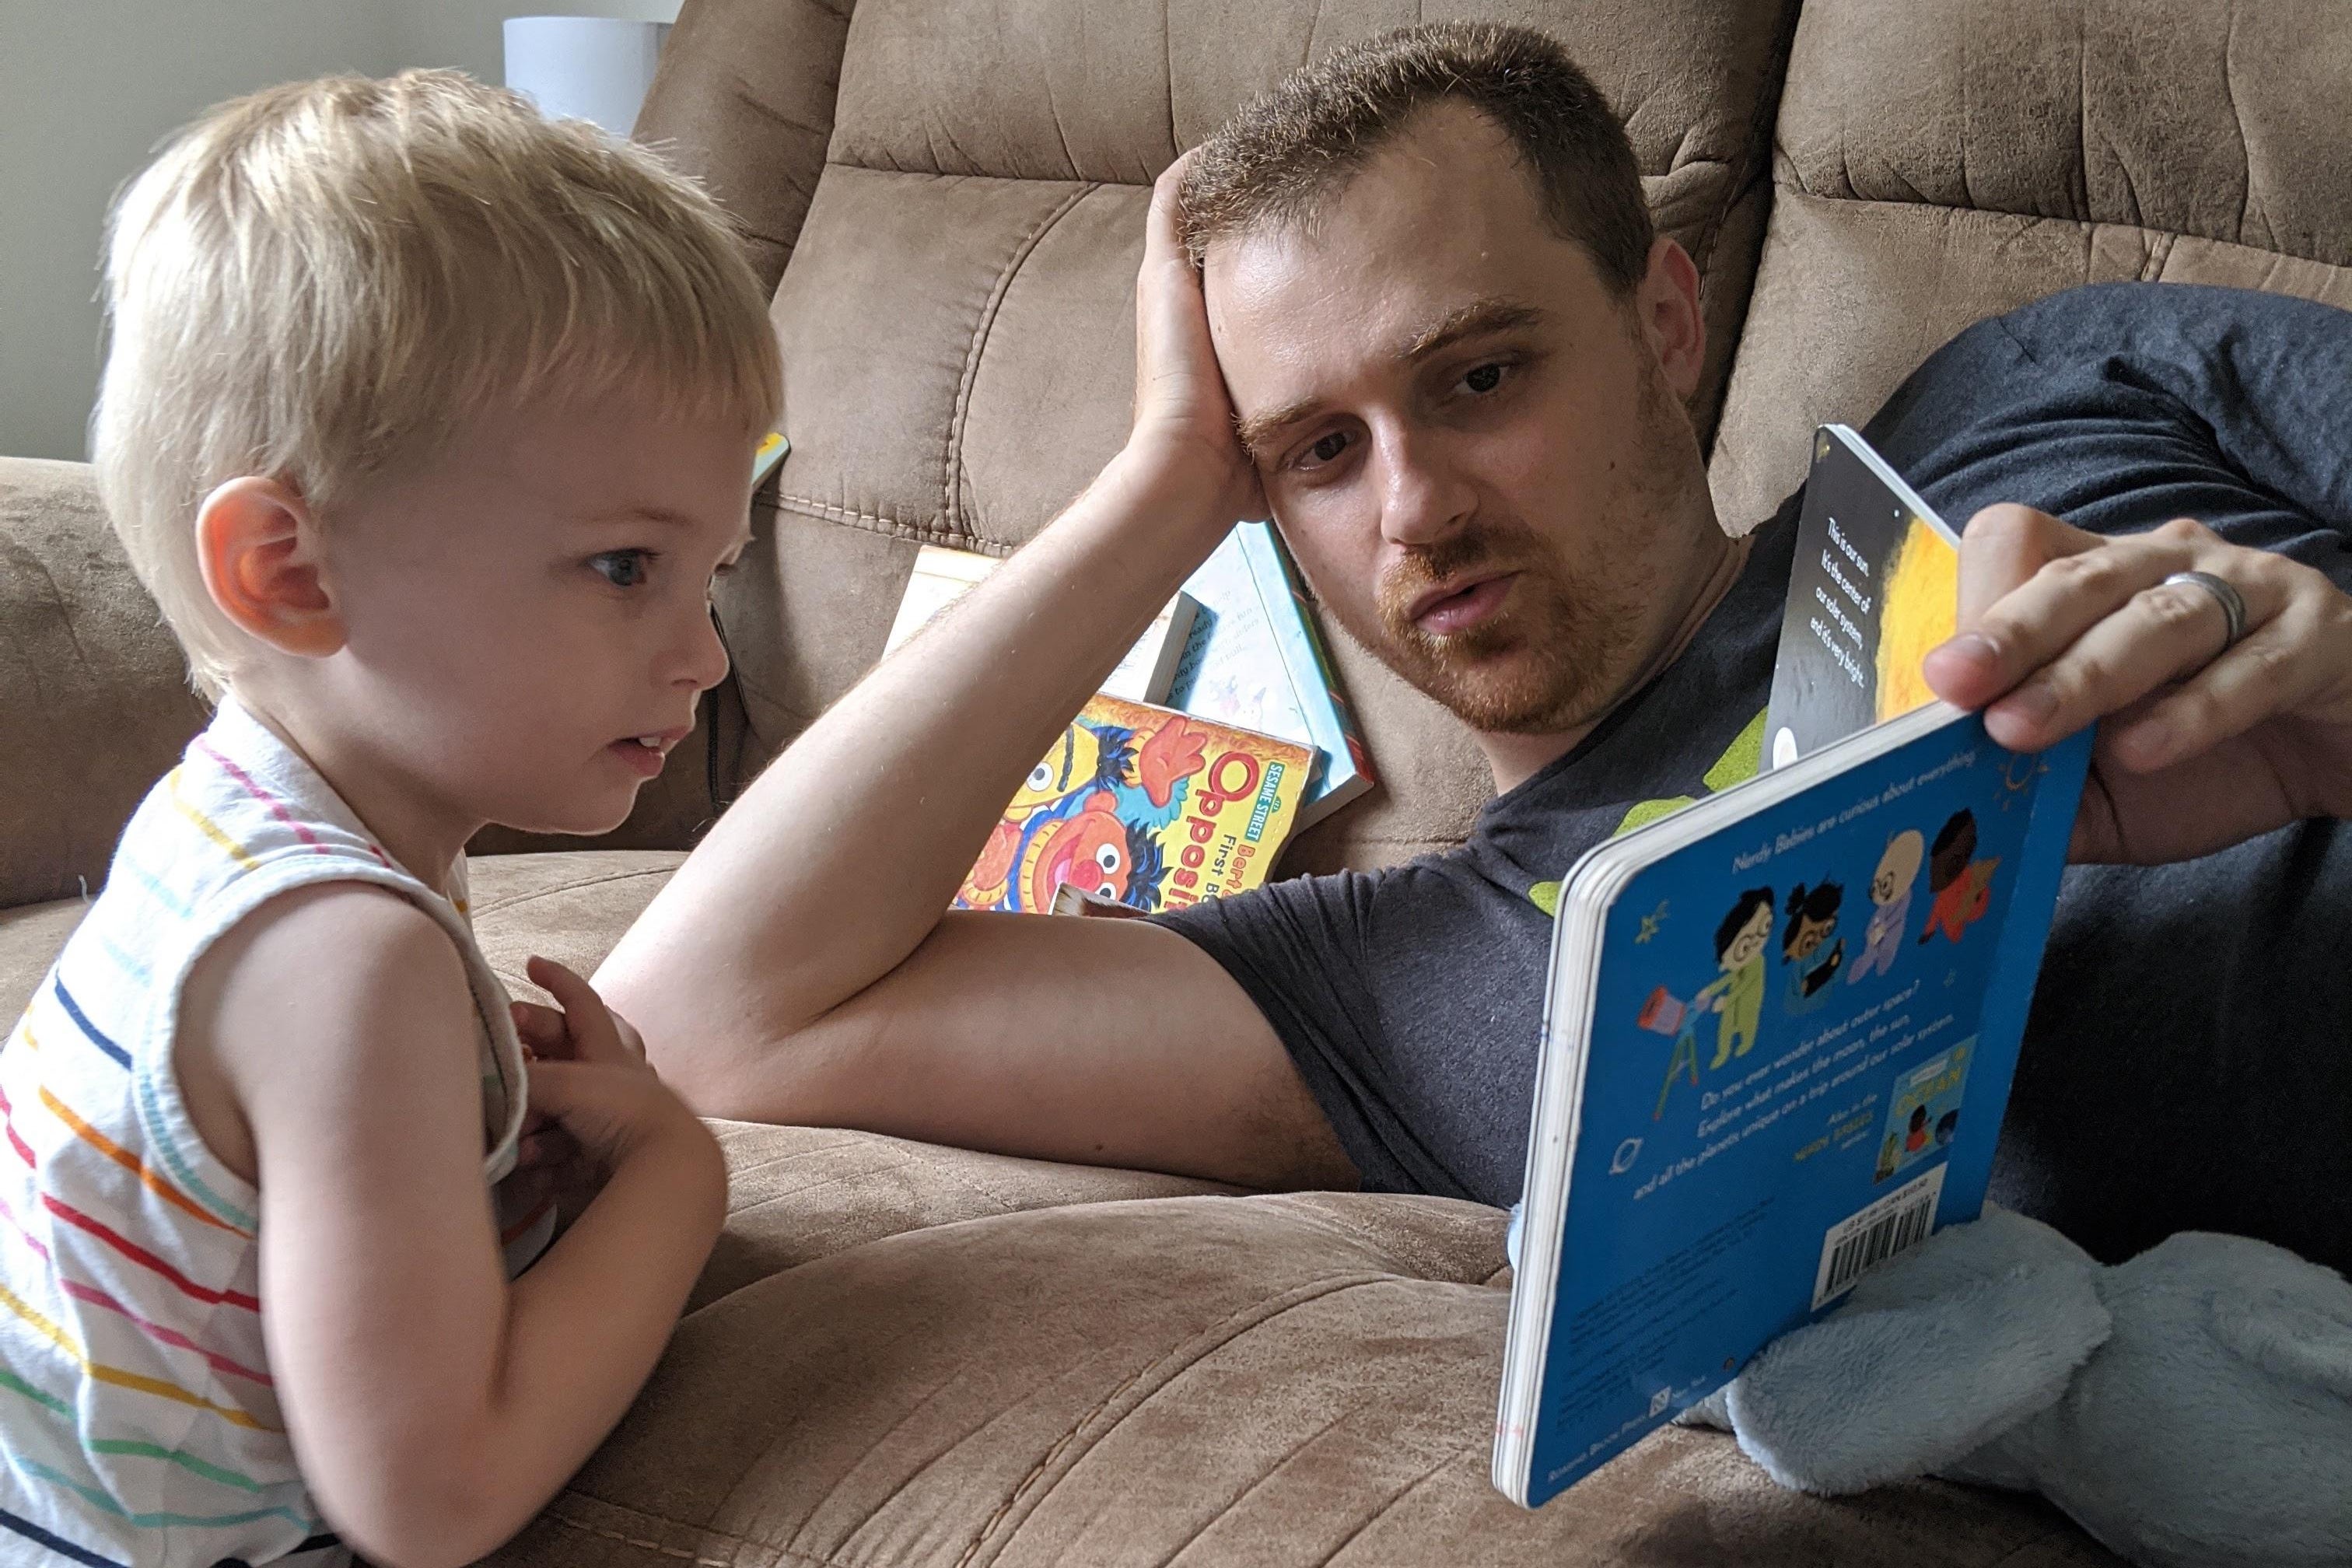 A man reads a children's book to his small child.